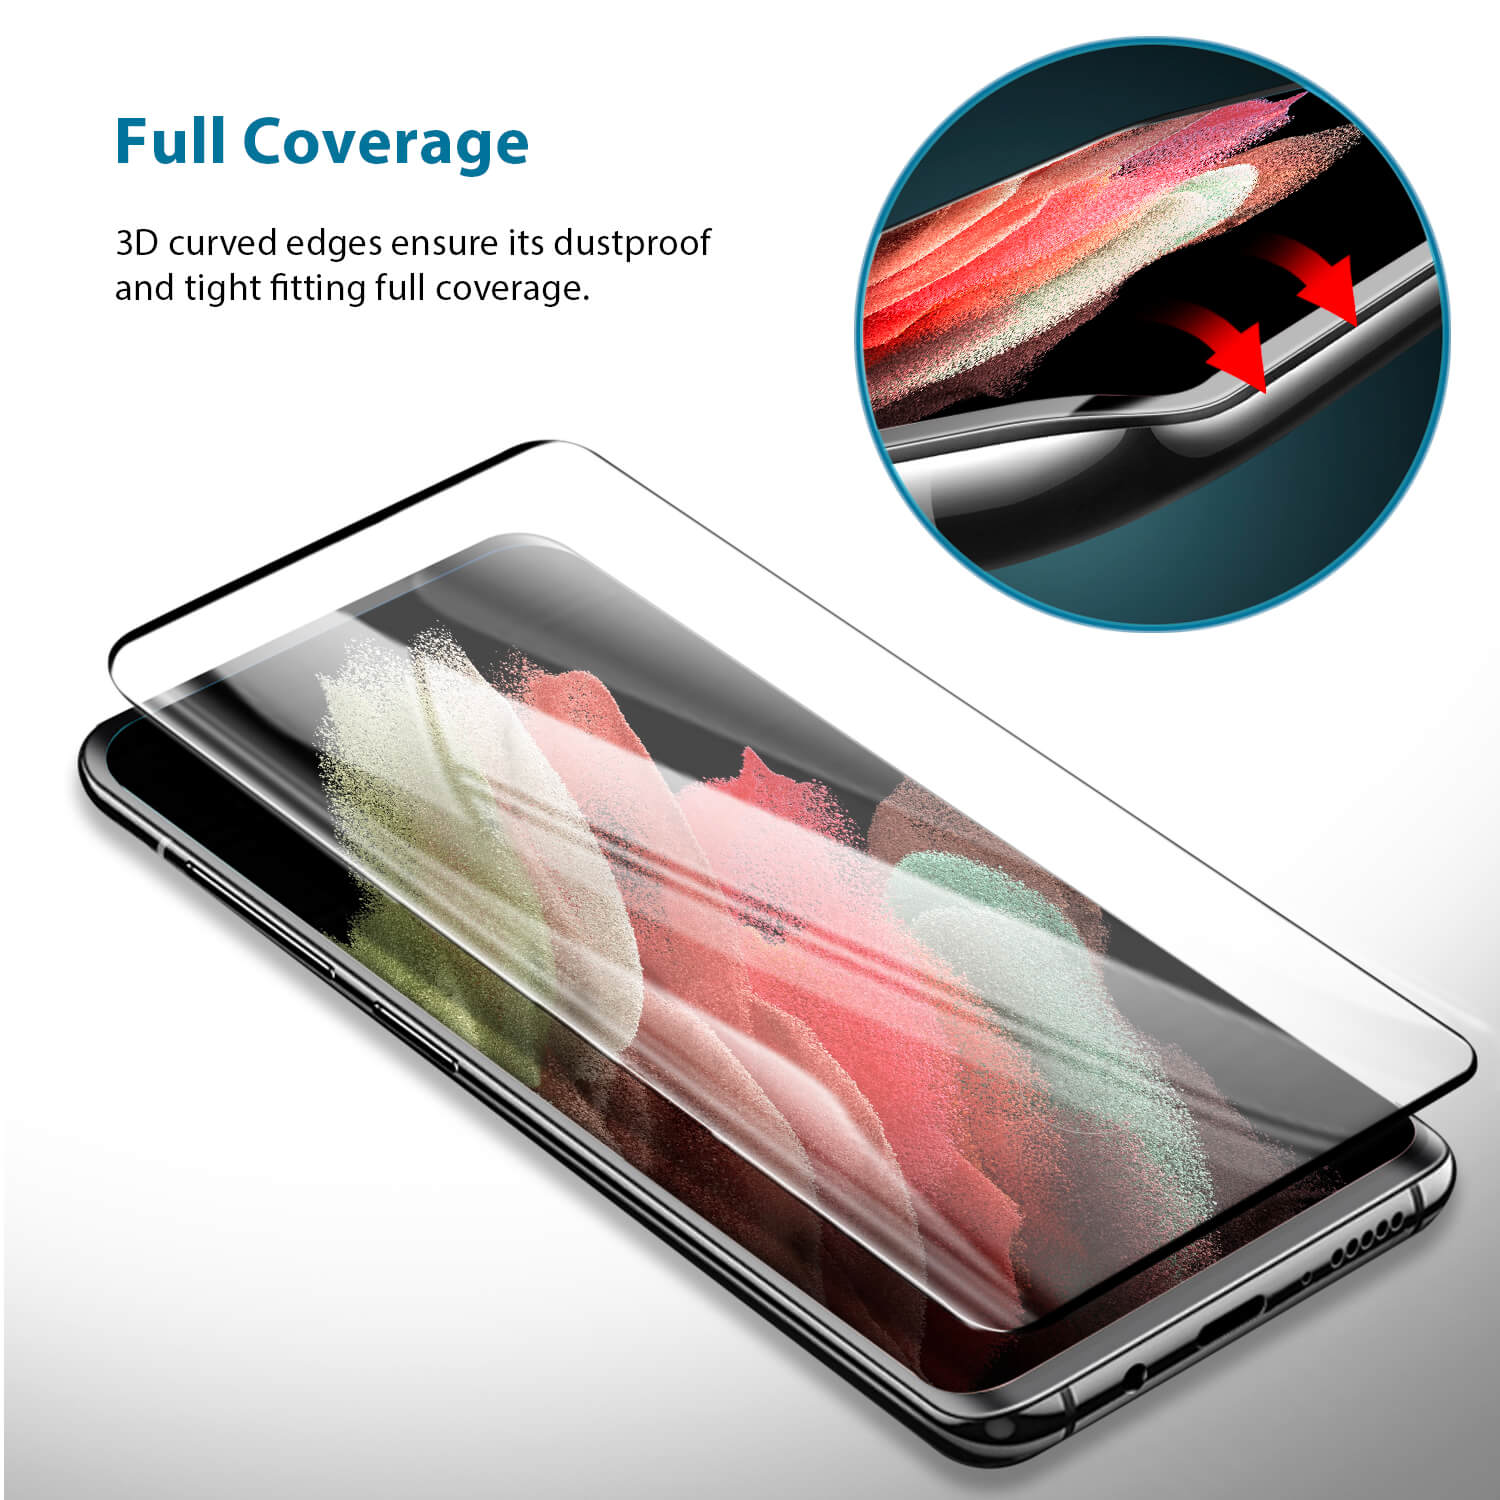 Tough On Samsung Galaxy S21 Plus 5G Tempered Glass Screen Protector Black